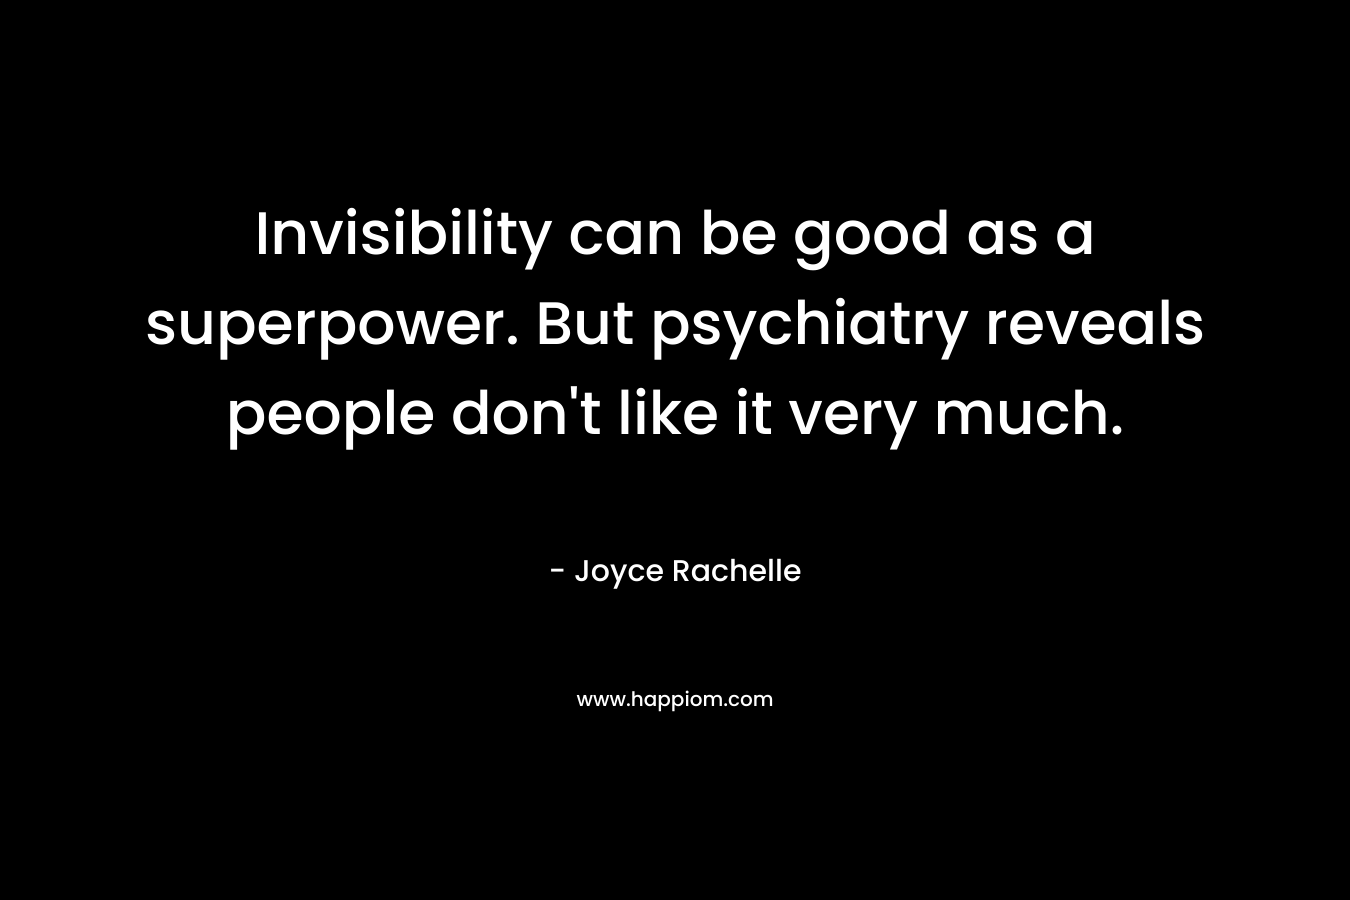 Invisibility can be good as a superpower. But psychiatry reveals people don’t like it very much. – Joyce Rachelle